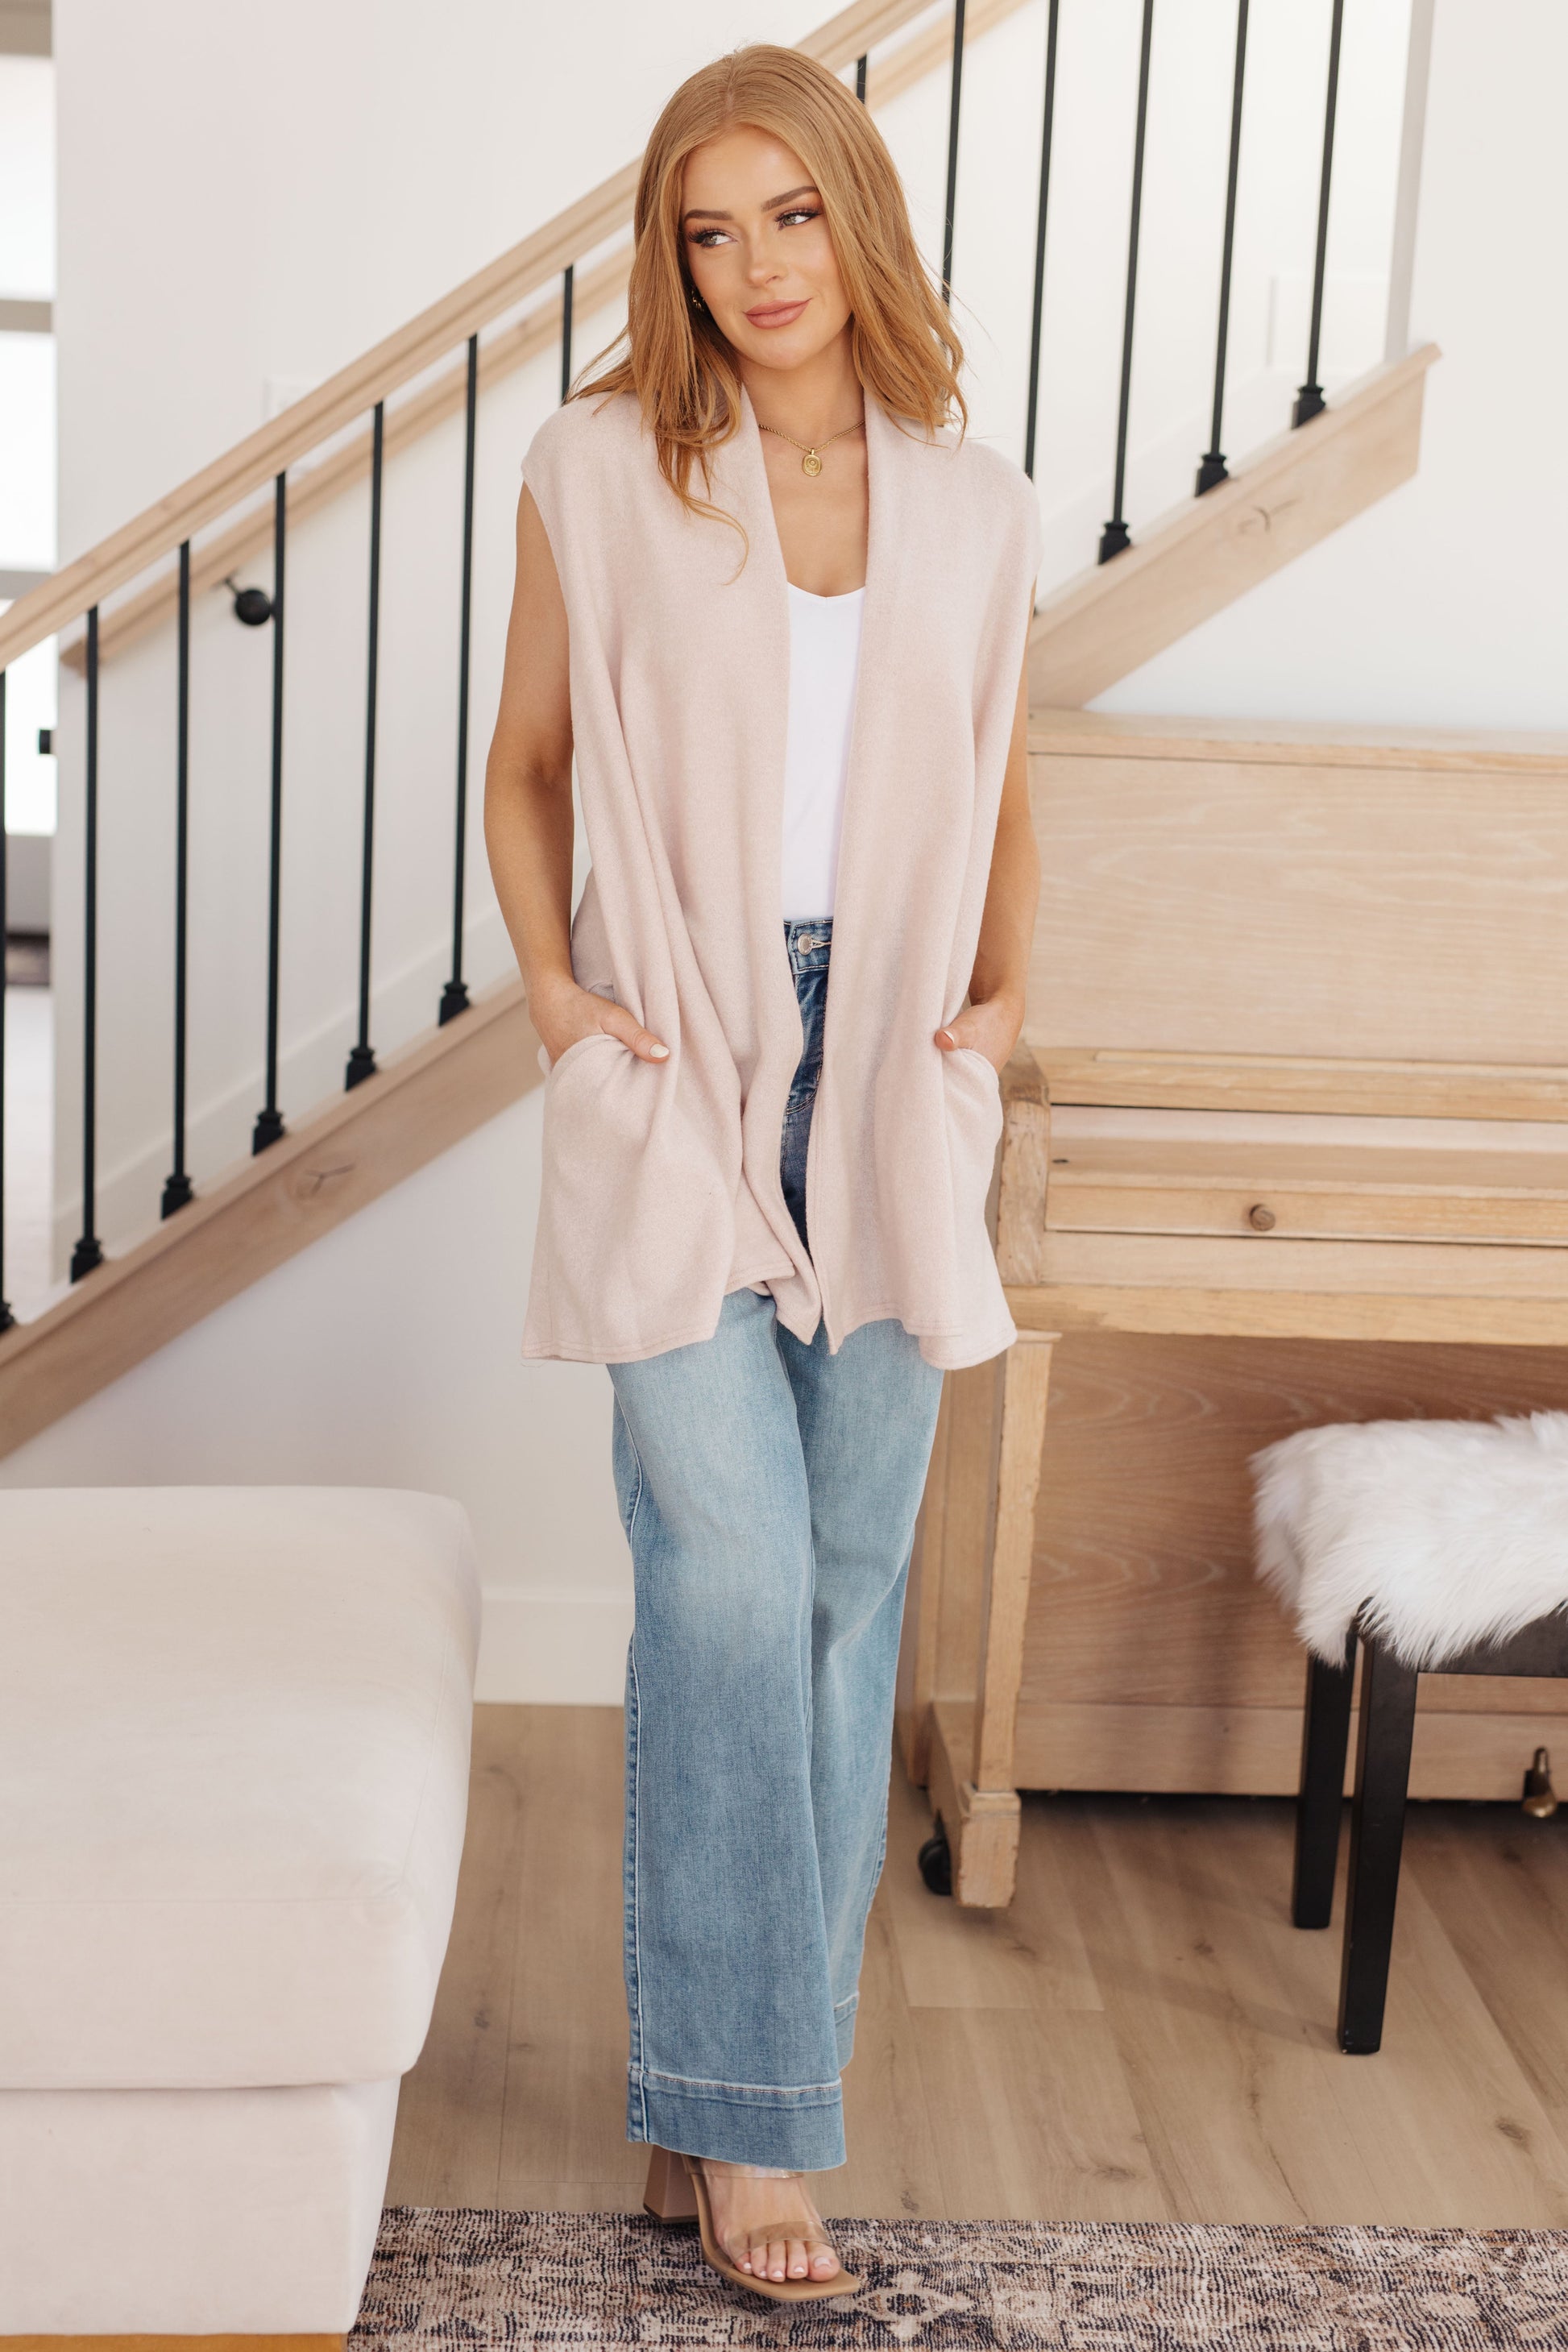 Layer your look with this Surely a Win Sleeveless Cardigan. Crafted from lightweight sweater knit with a shawl collar, it features a sleeveless, open front design with pockets for added convenience. Give any outfit a stylish finish with this cardigan! S - 3X